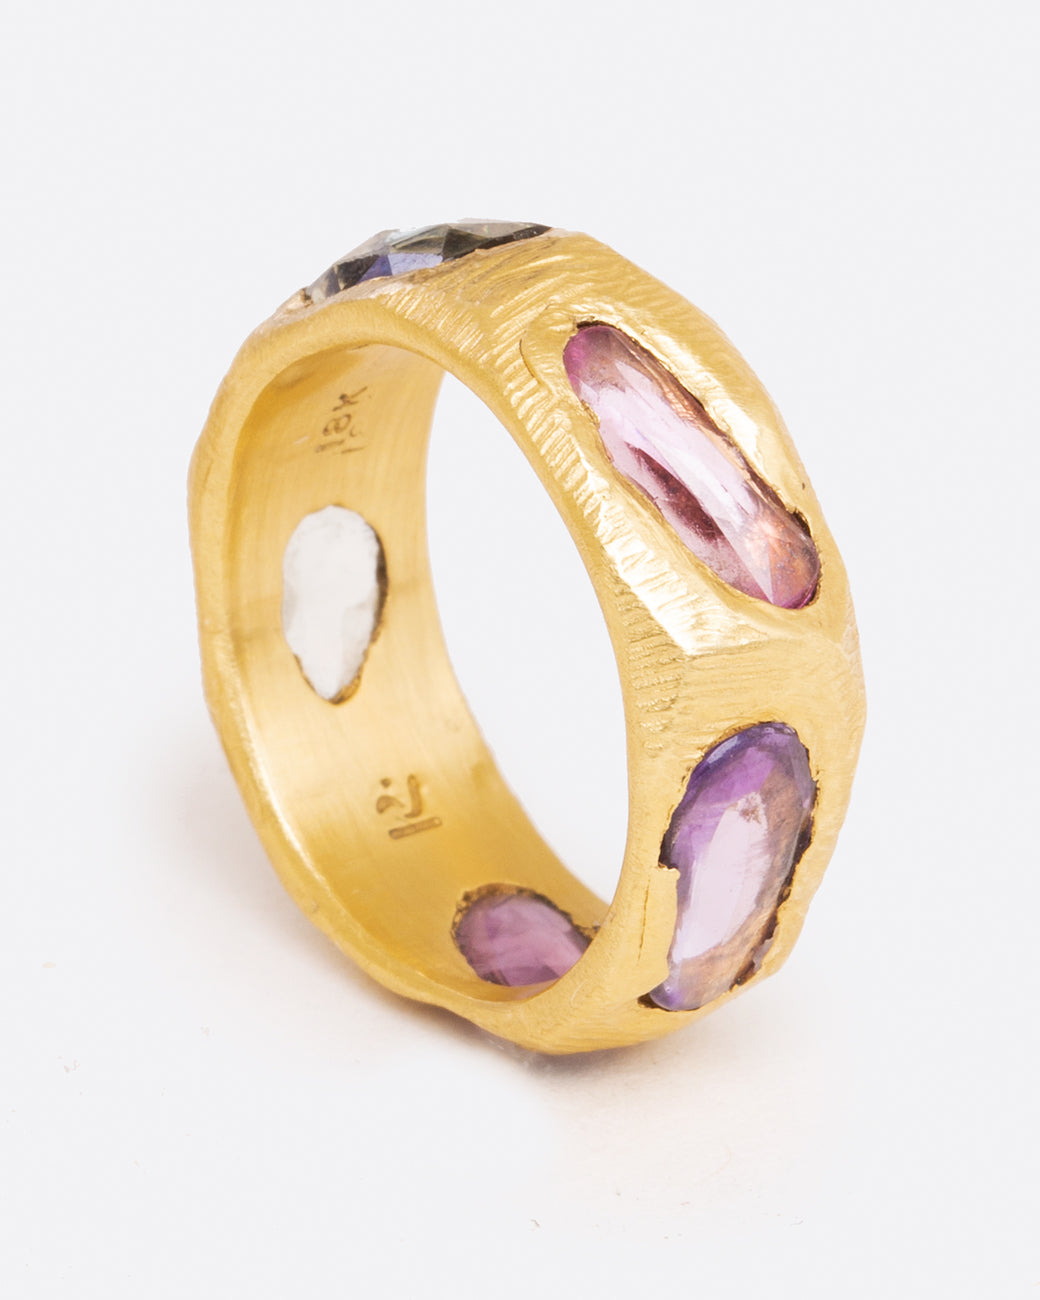 Brushed gold sapphire band with purple sapphires, shown from the side.